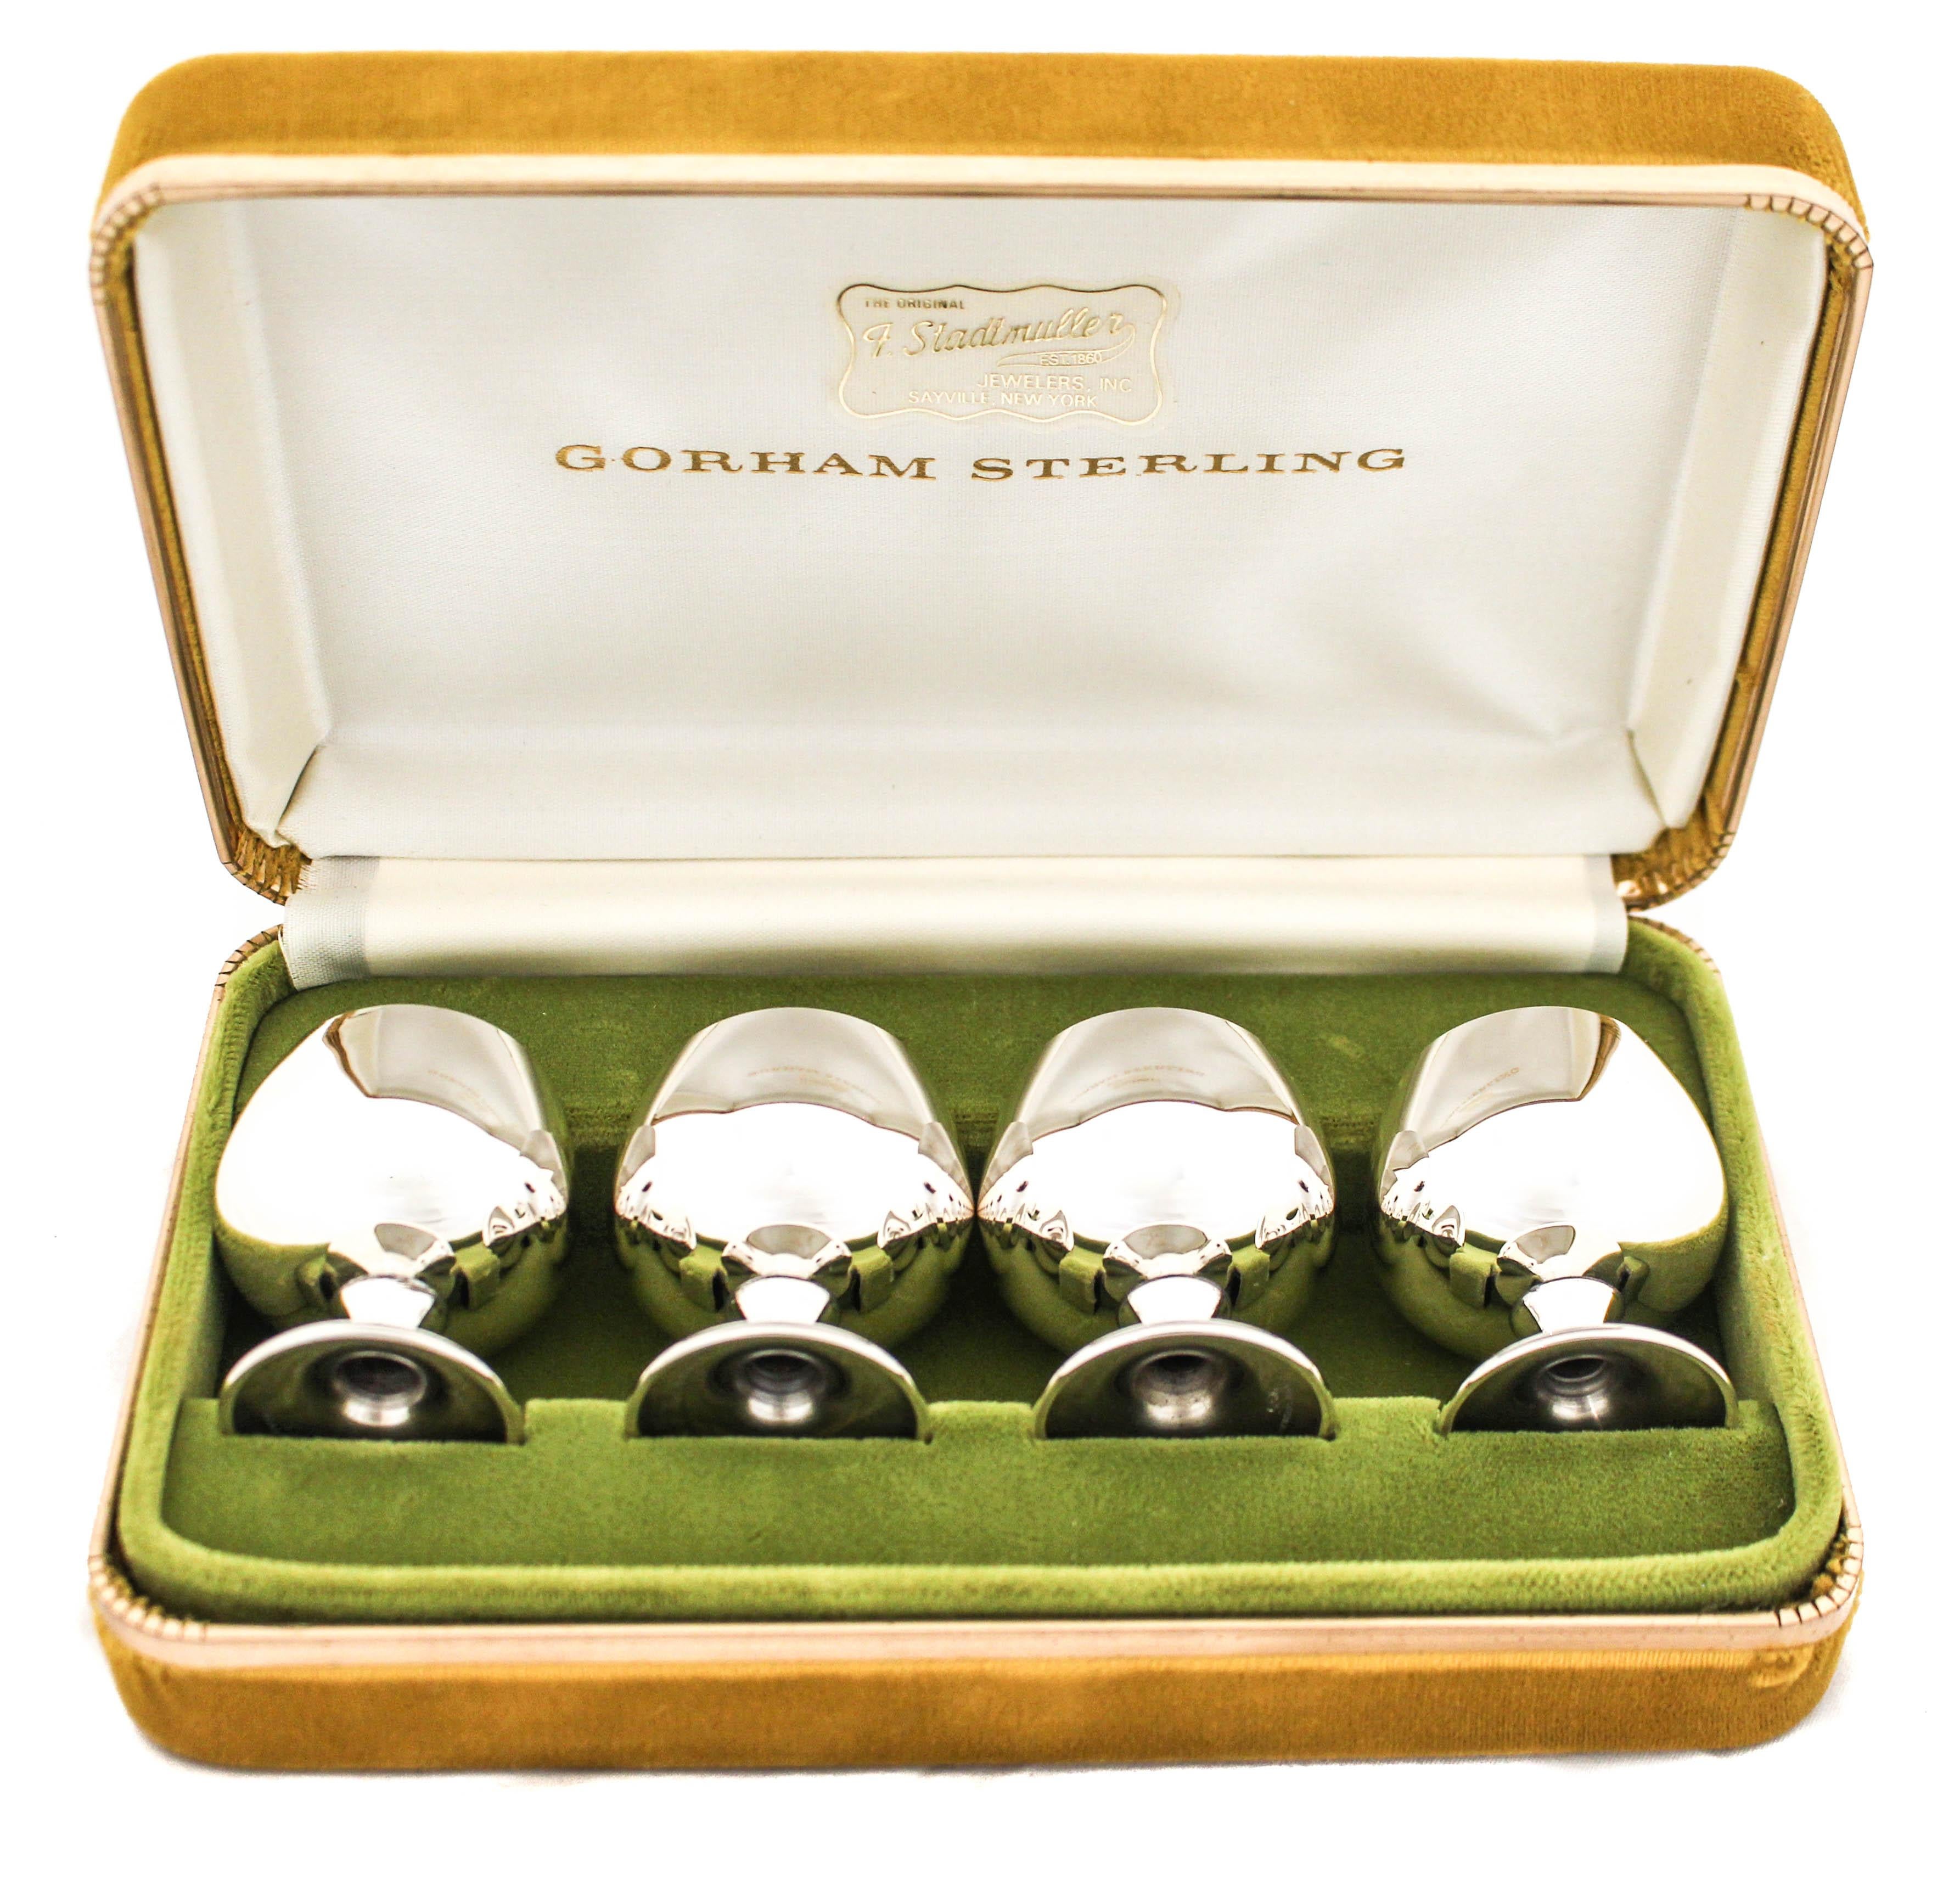 We are thrilled to present this set of twelve Mid-Century Modern sterling silver cordials in their original boxes. There are four cordials per box and three boxes, a total of twelve cordials. The boxes are in excellent condition and each cup fits